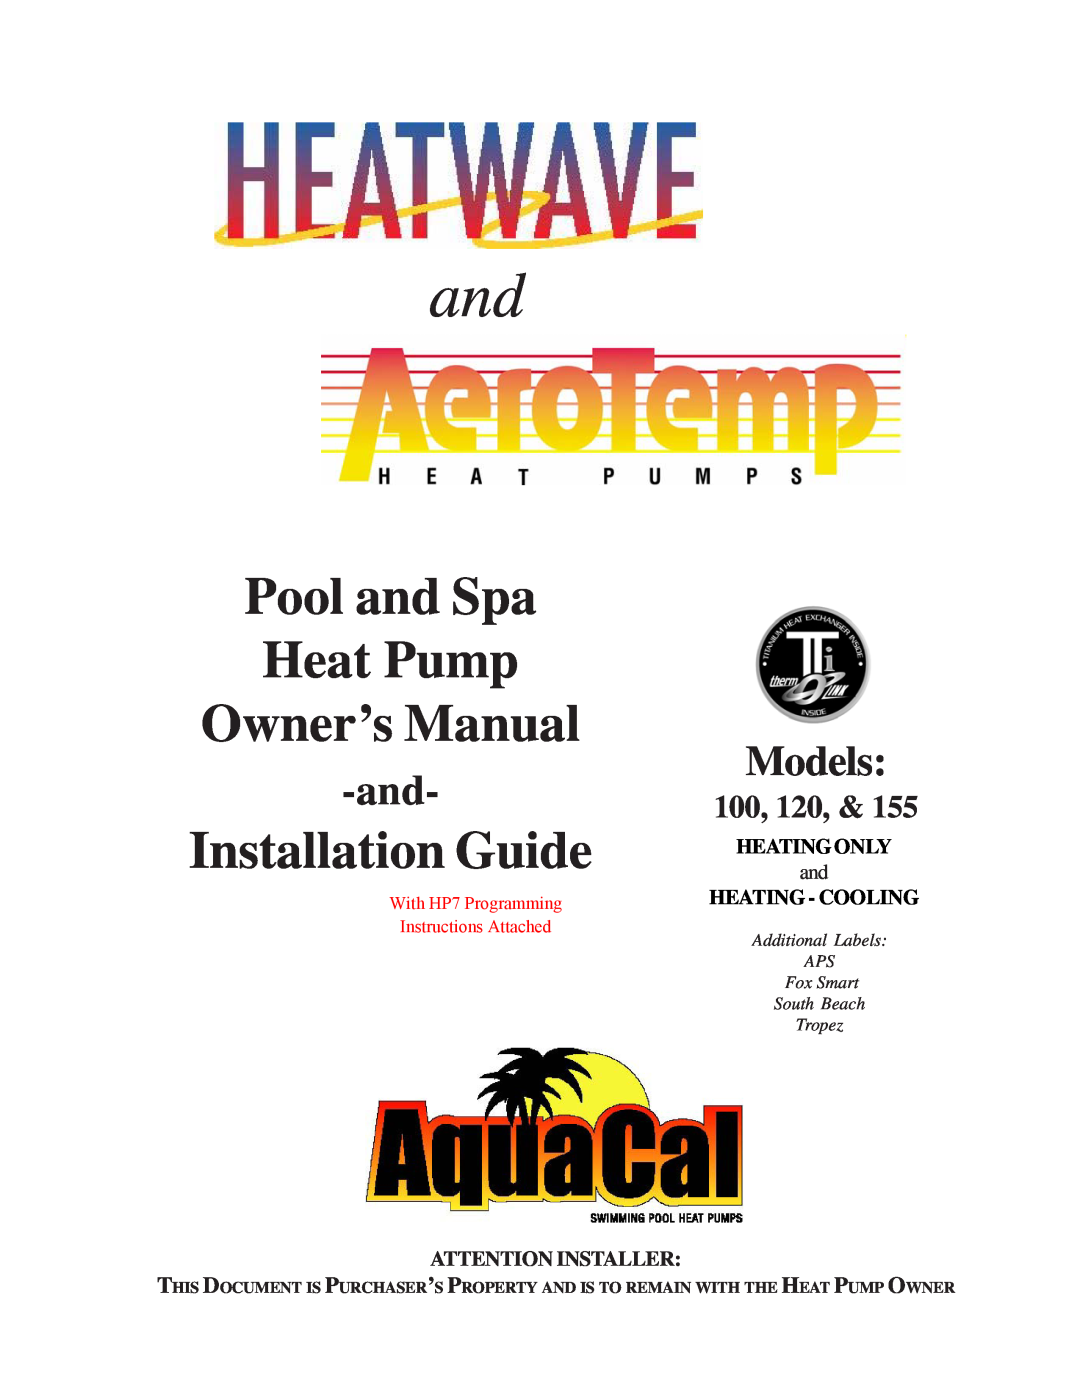 Aquacal owner manual Pool and Spa Heat Pump Owner’s Manual, Installation Guide, Models, 100, 120, Attention Installer 